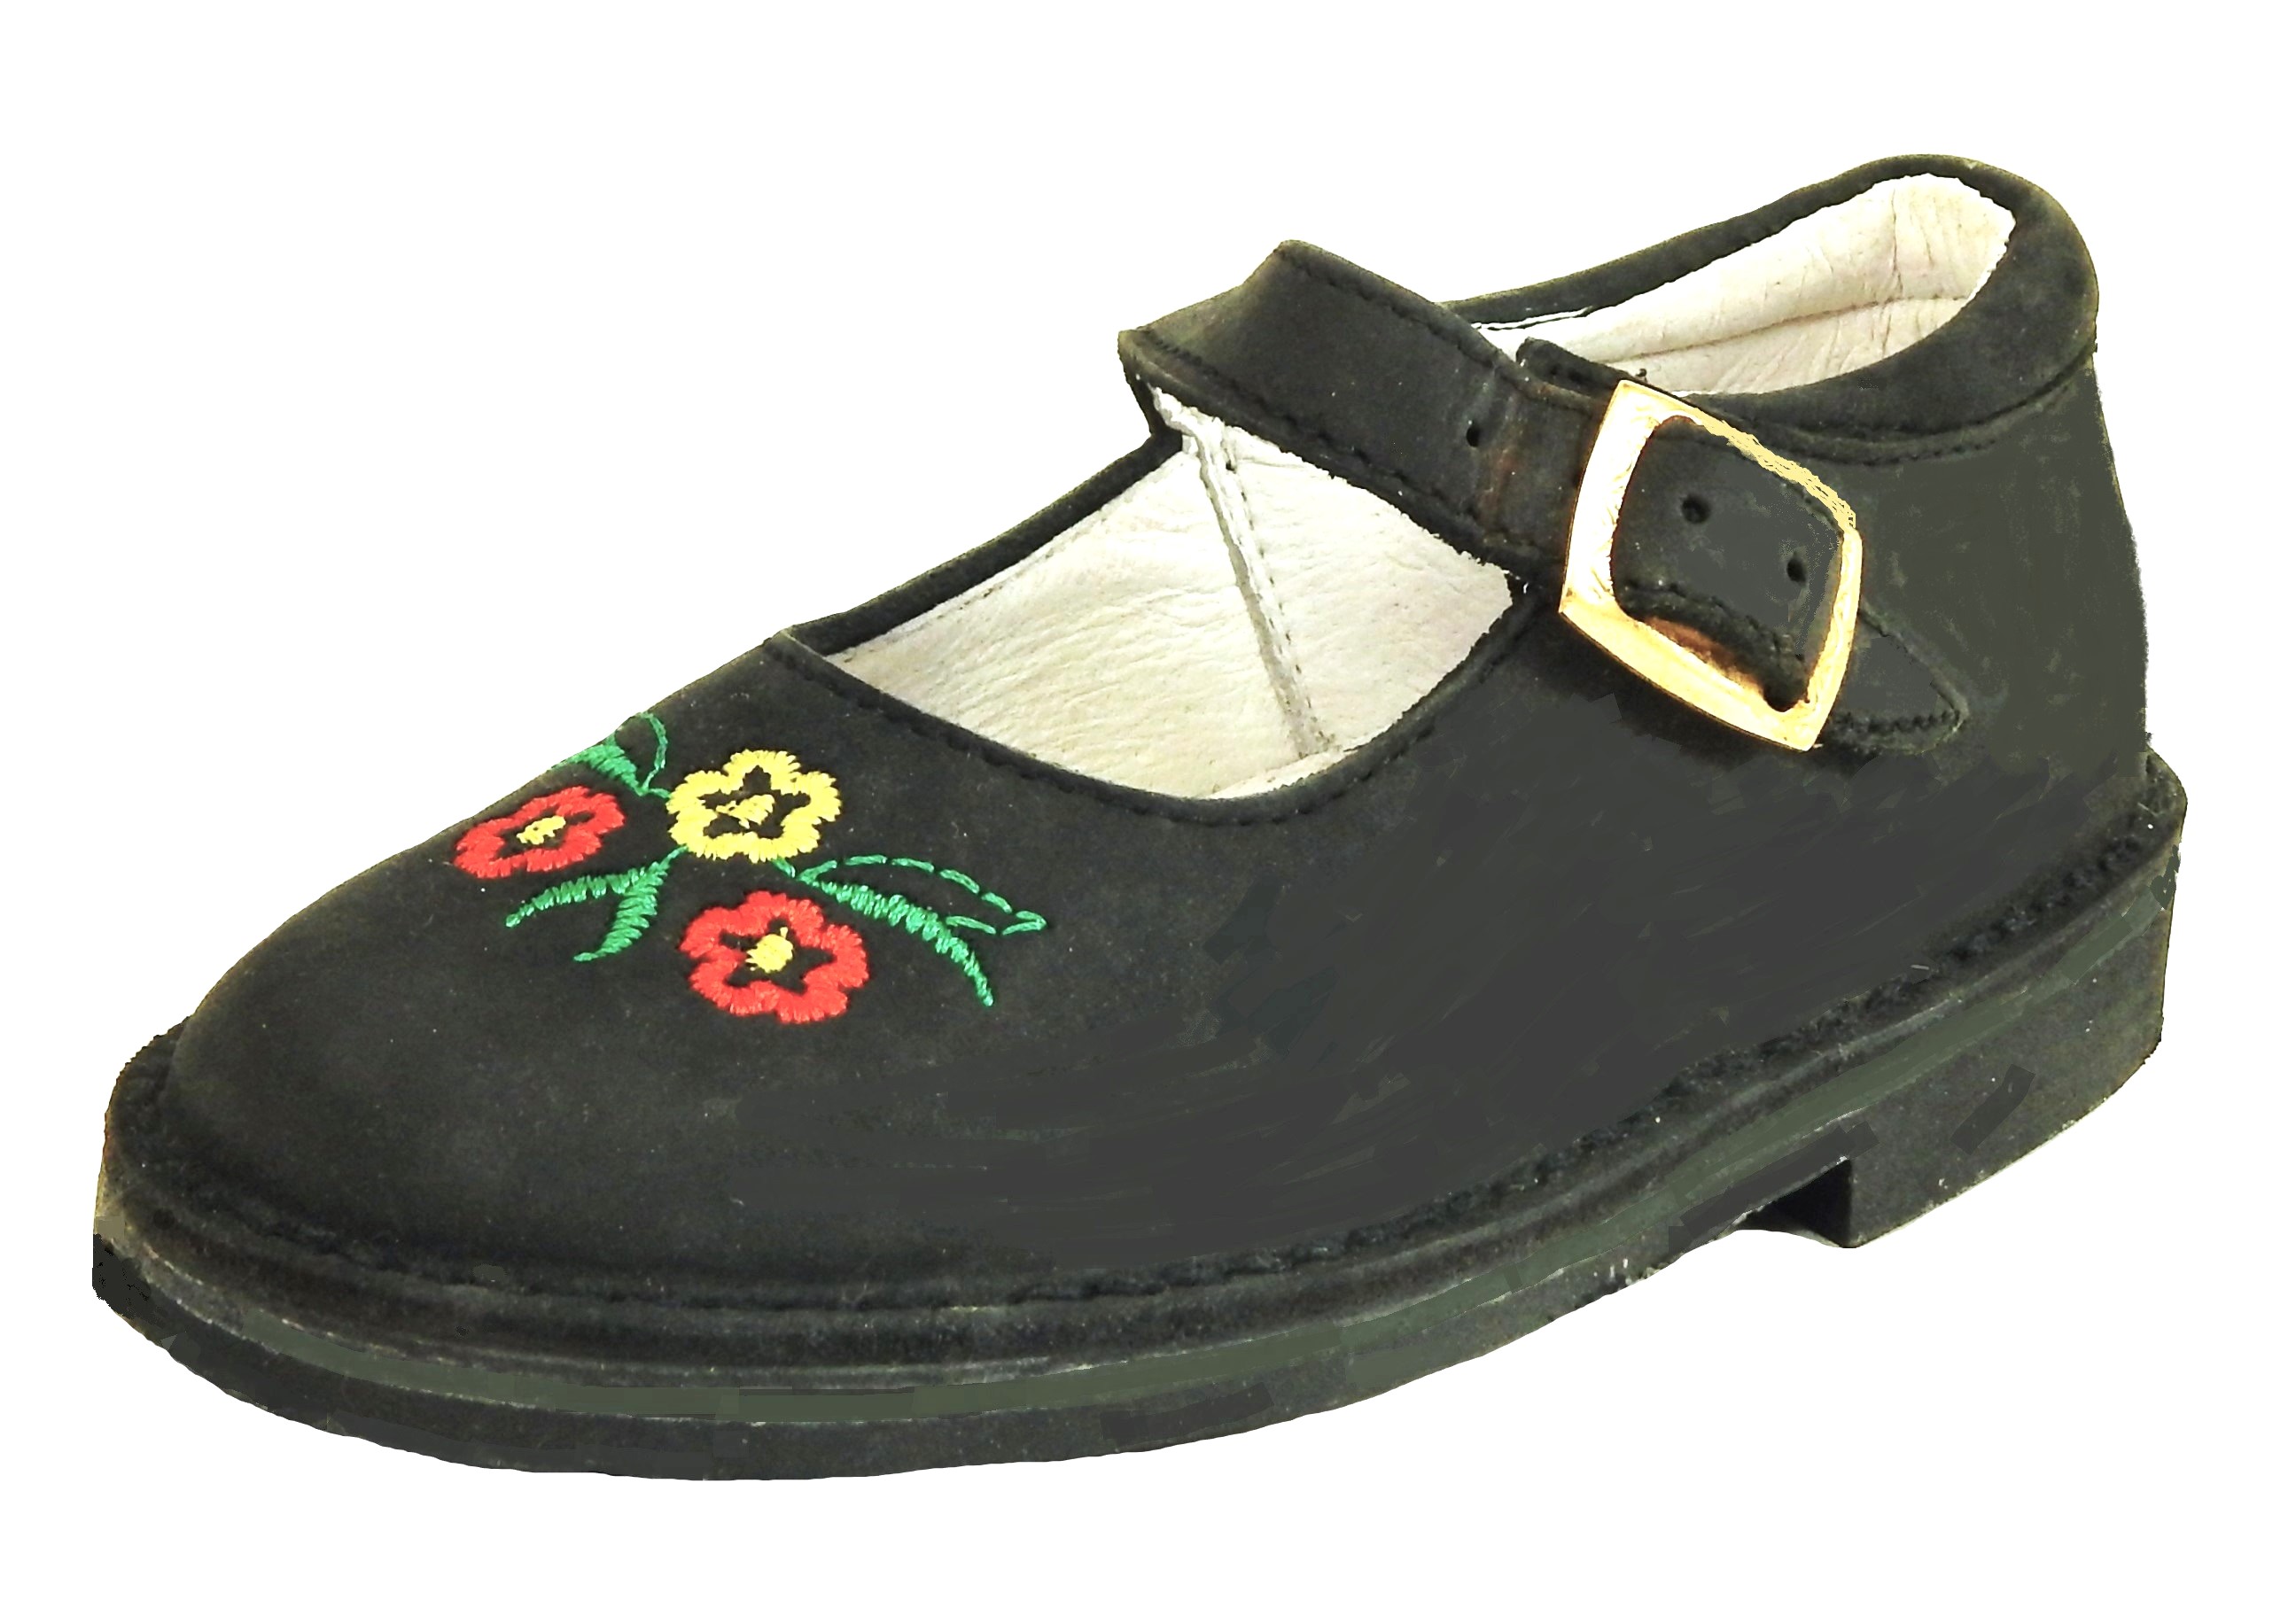 A-1229 - Black Flower Mary Janes